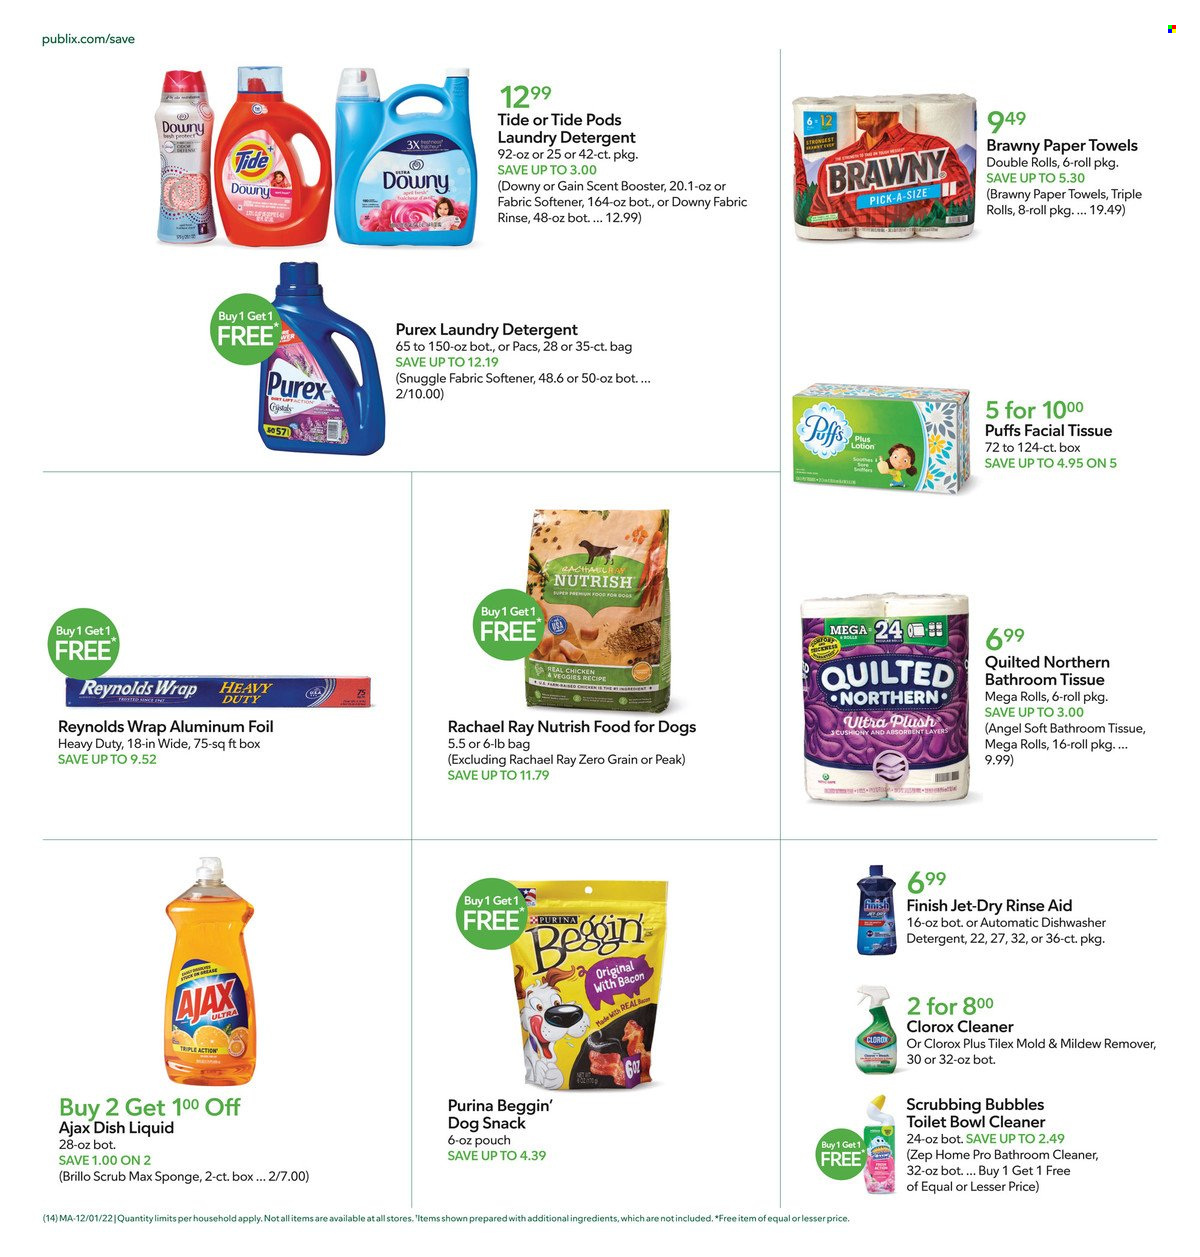 thumbnail - Publix Flyer - 12/01/2022 - 12/07/2022 - Sales products - puffs, snack, bath tissue, Quilted Northern, kitchen towels, paper towels, detergent, Gain, Scrubbing Bubbles, cleaner, Clorox, Ajax, Snuggle, Tide, fabric softener, laundry detergent, Purex, Downy Laundry, dishwashing liquid, Jet, body lotion, Purina, Beggin', Nutrish. Page 18.